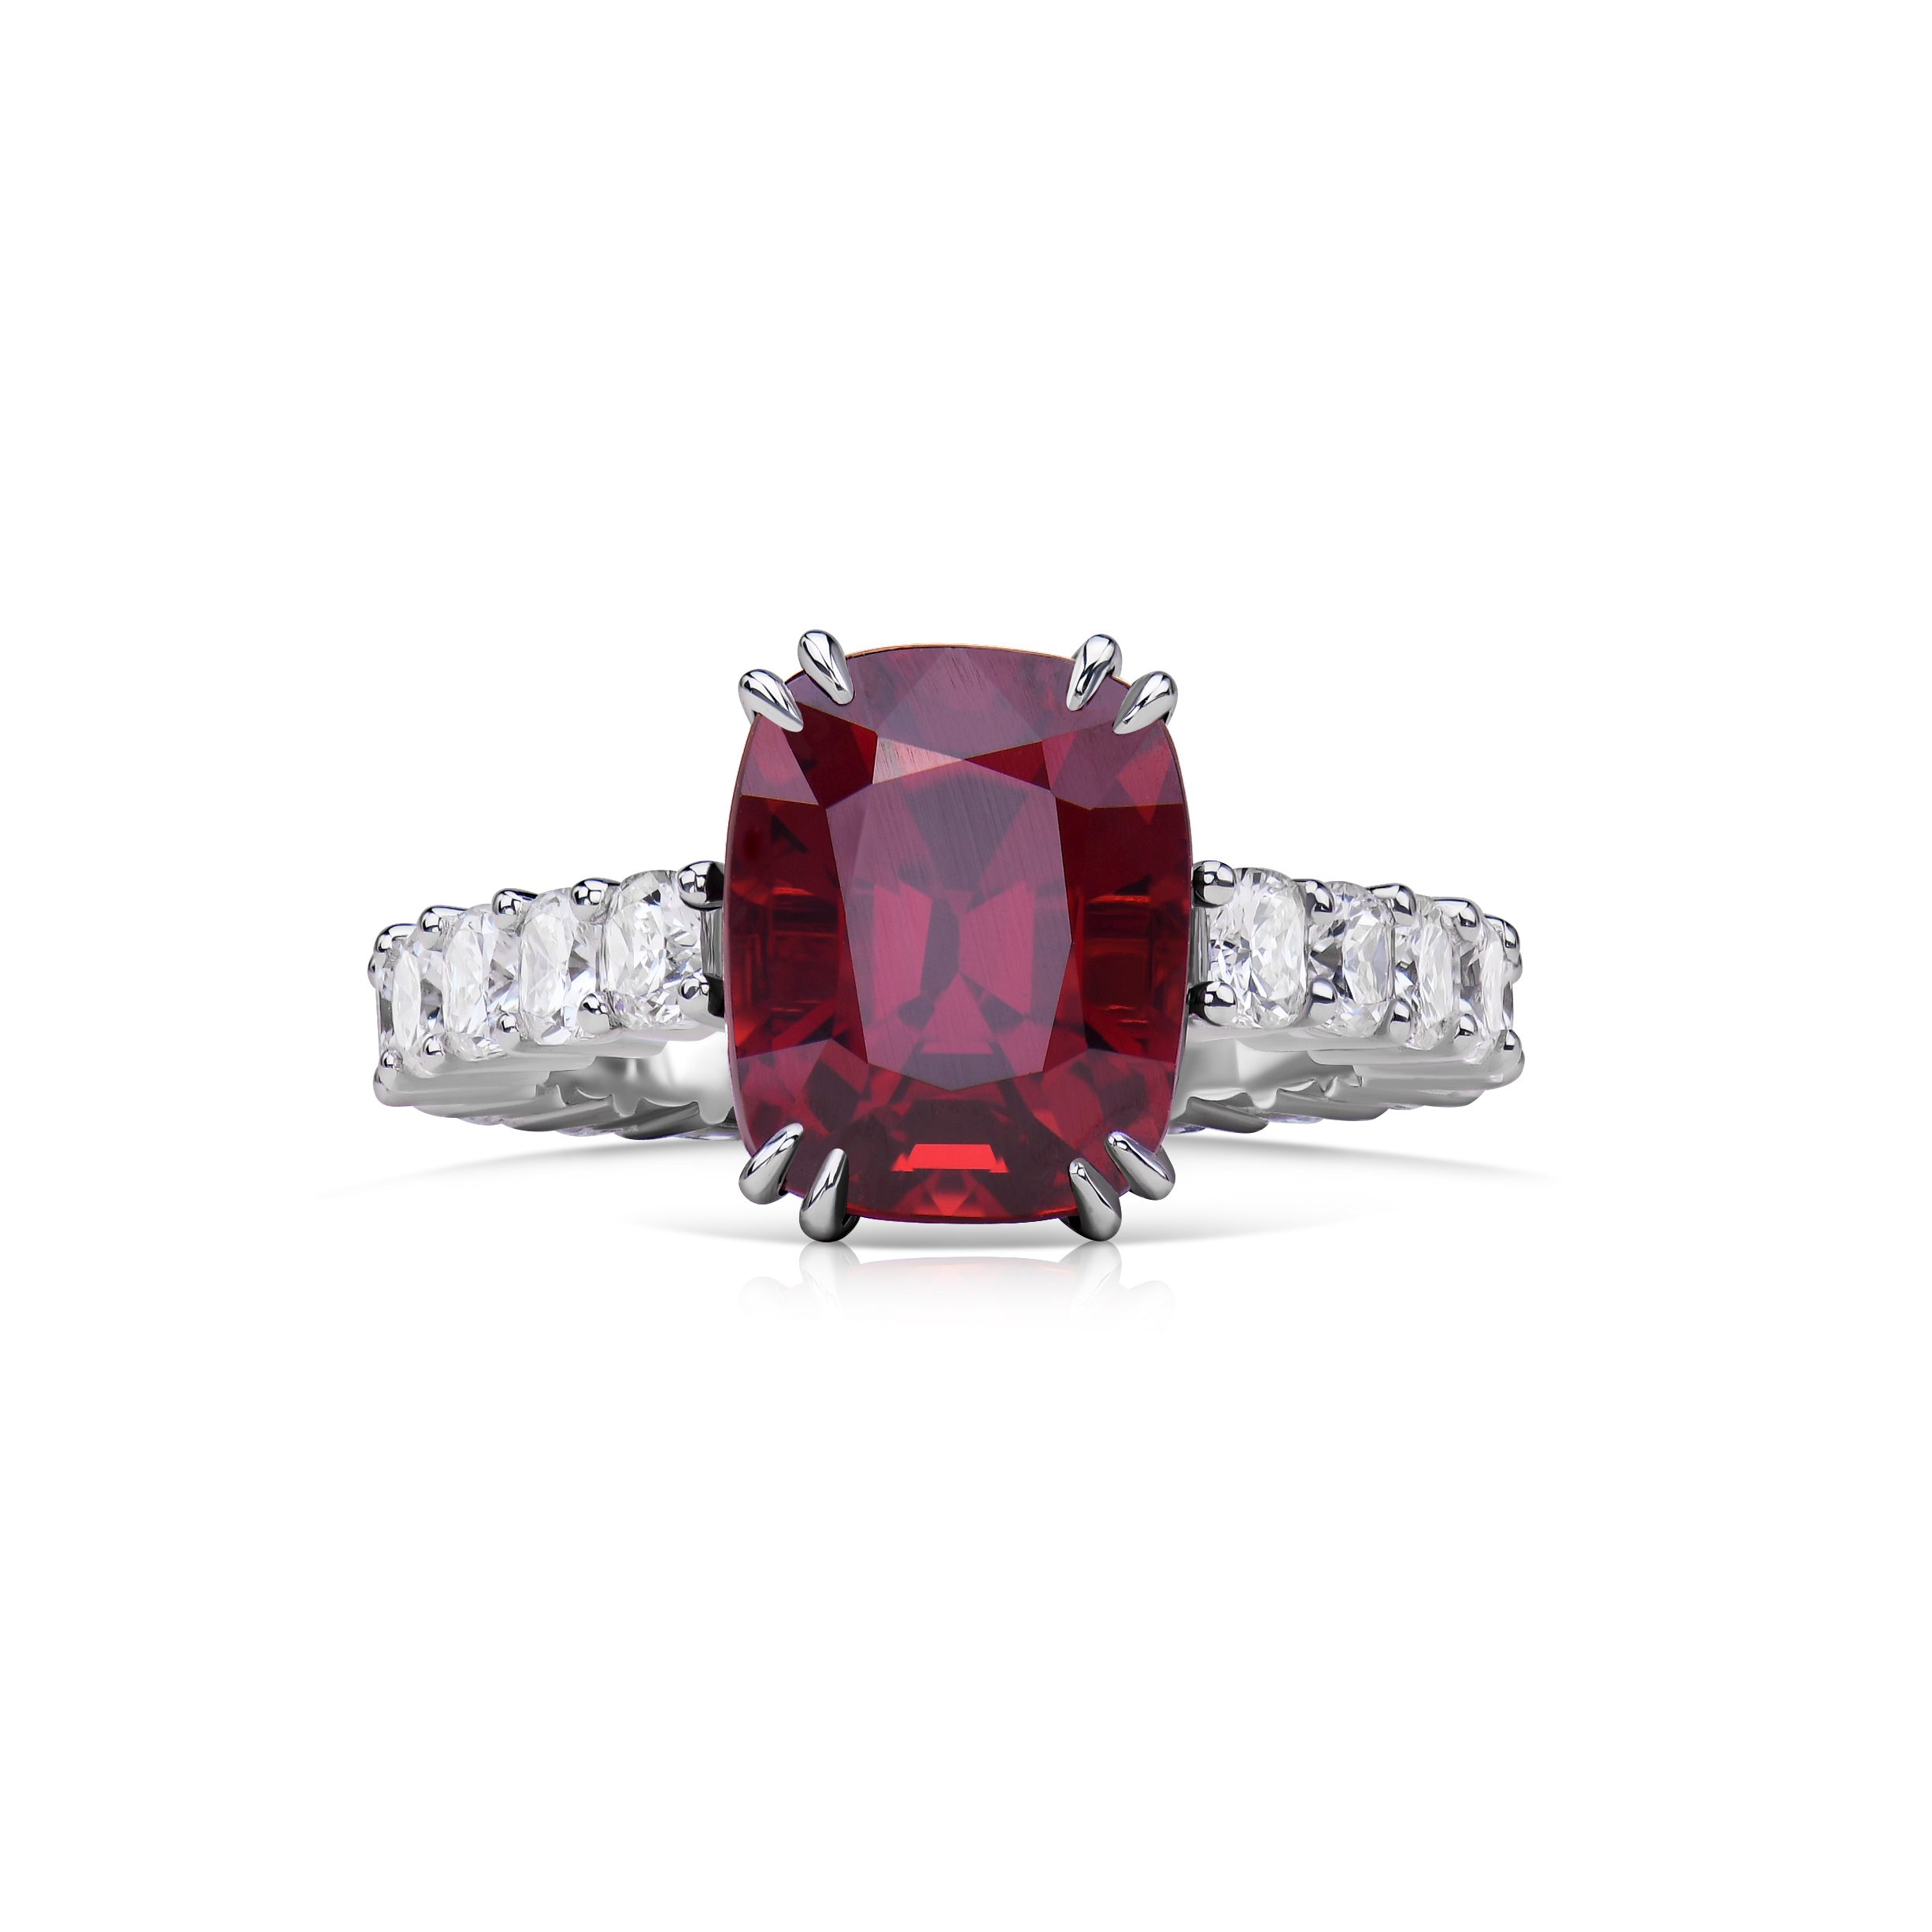 Spinel 5.57 ct ring with diamonds 3.06 ct #1